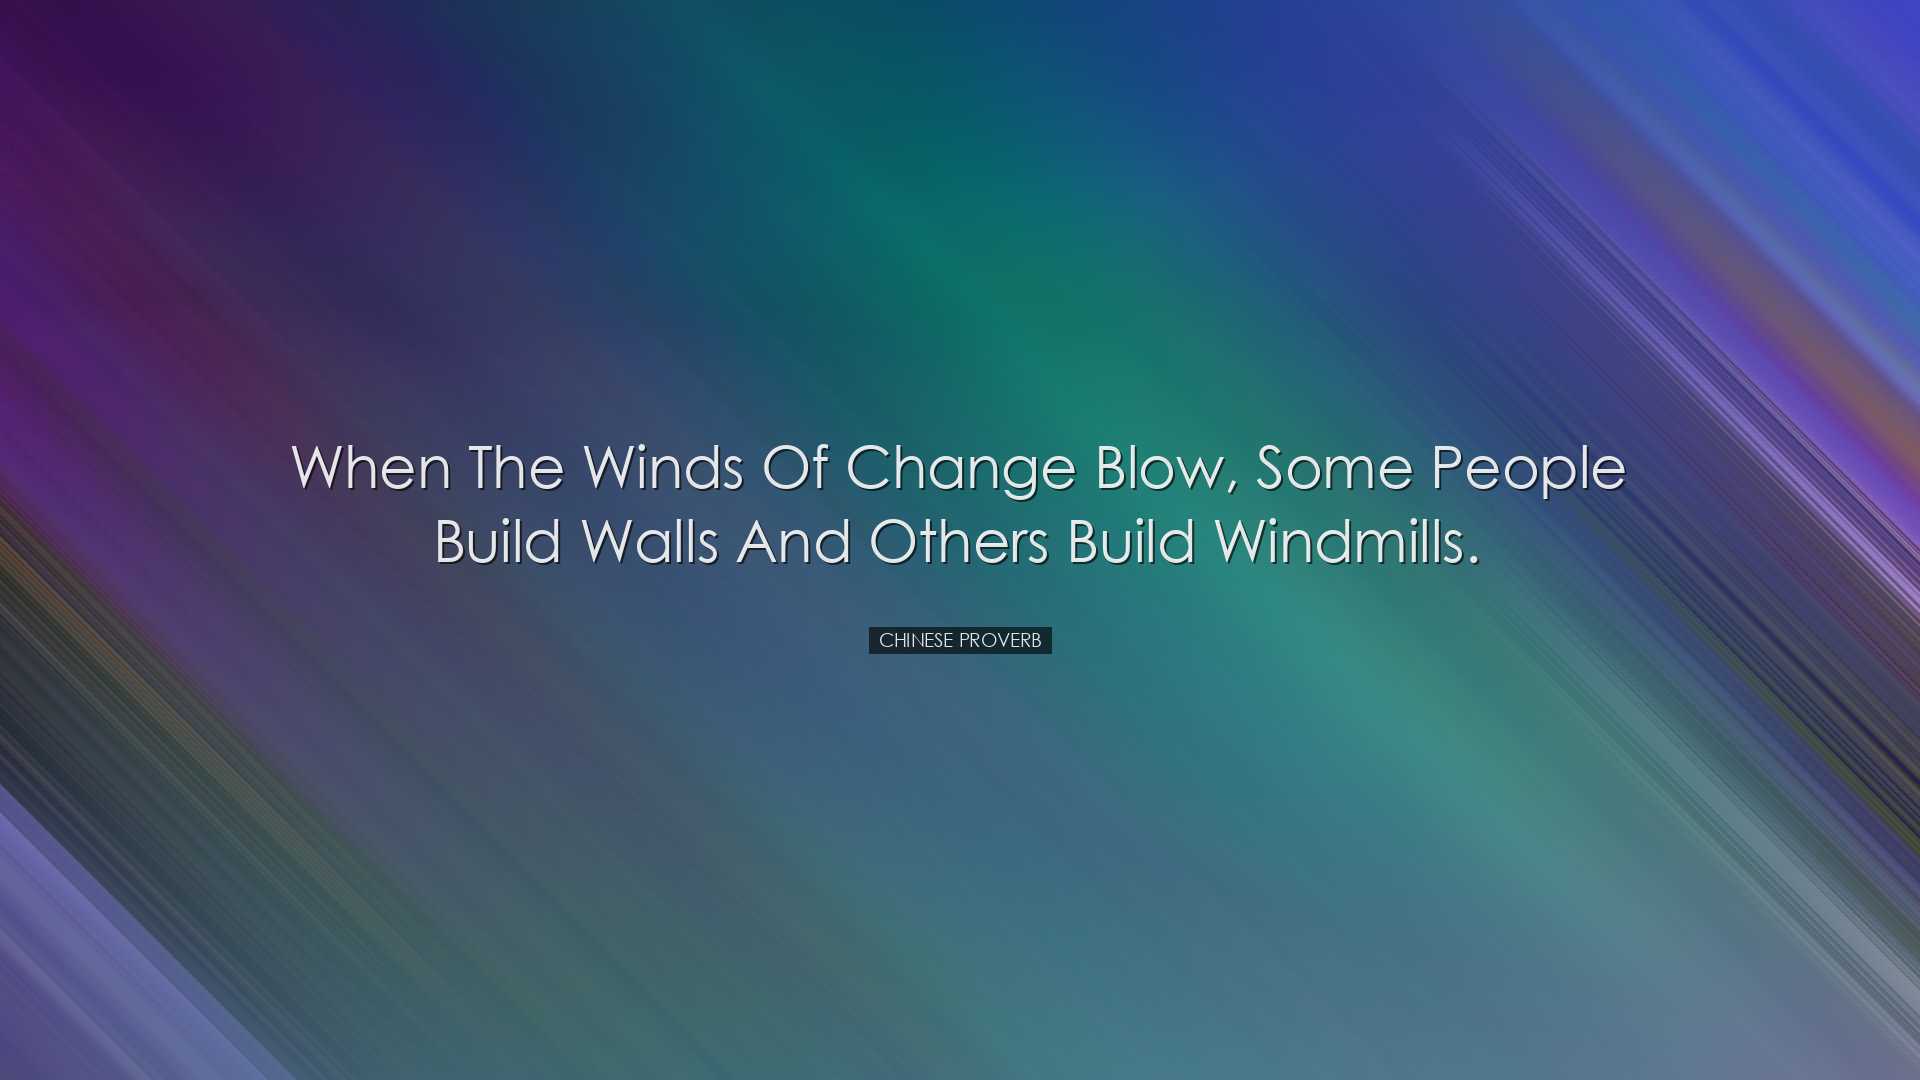 When the winds of change blow, some people build walls and others